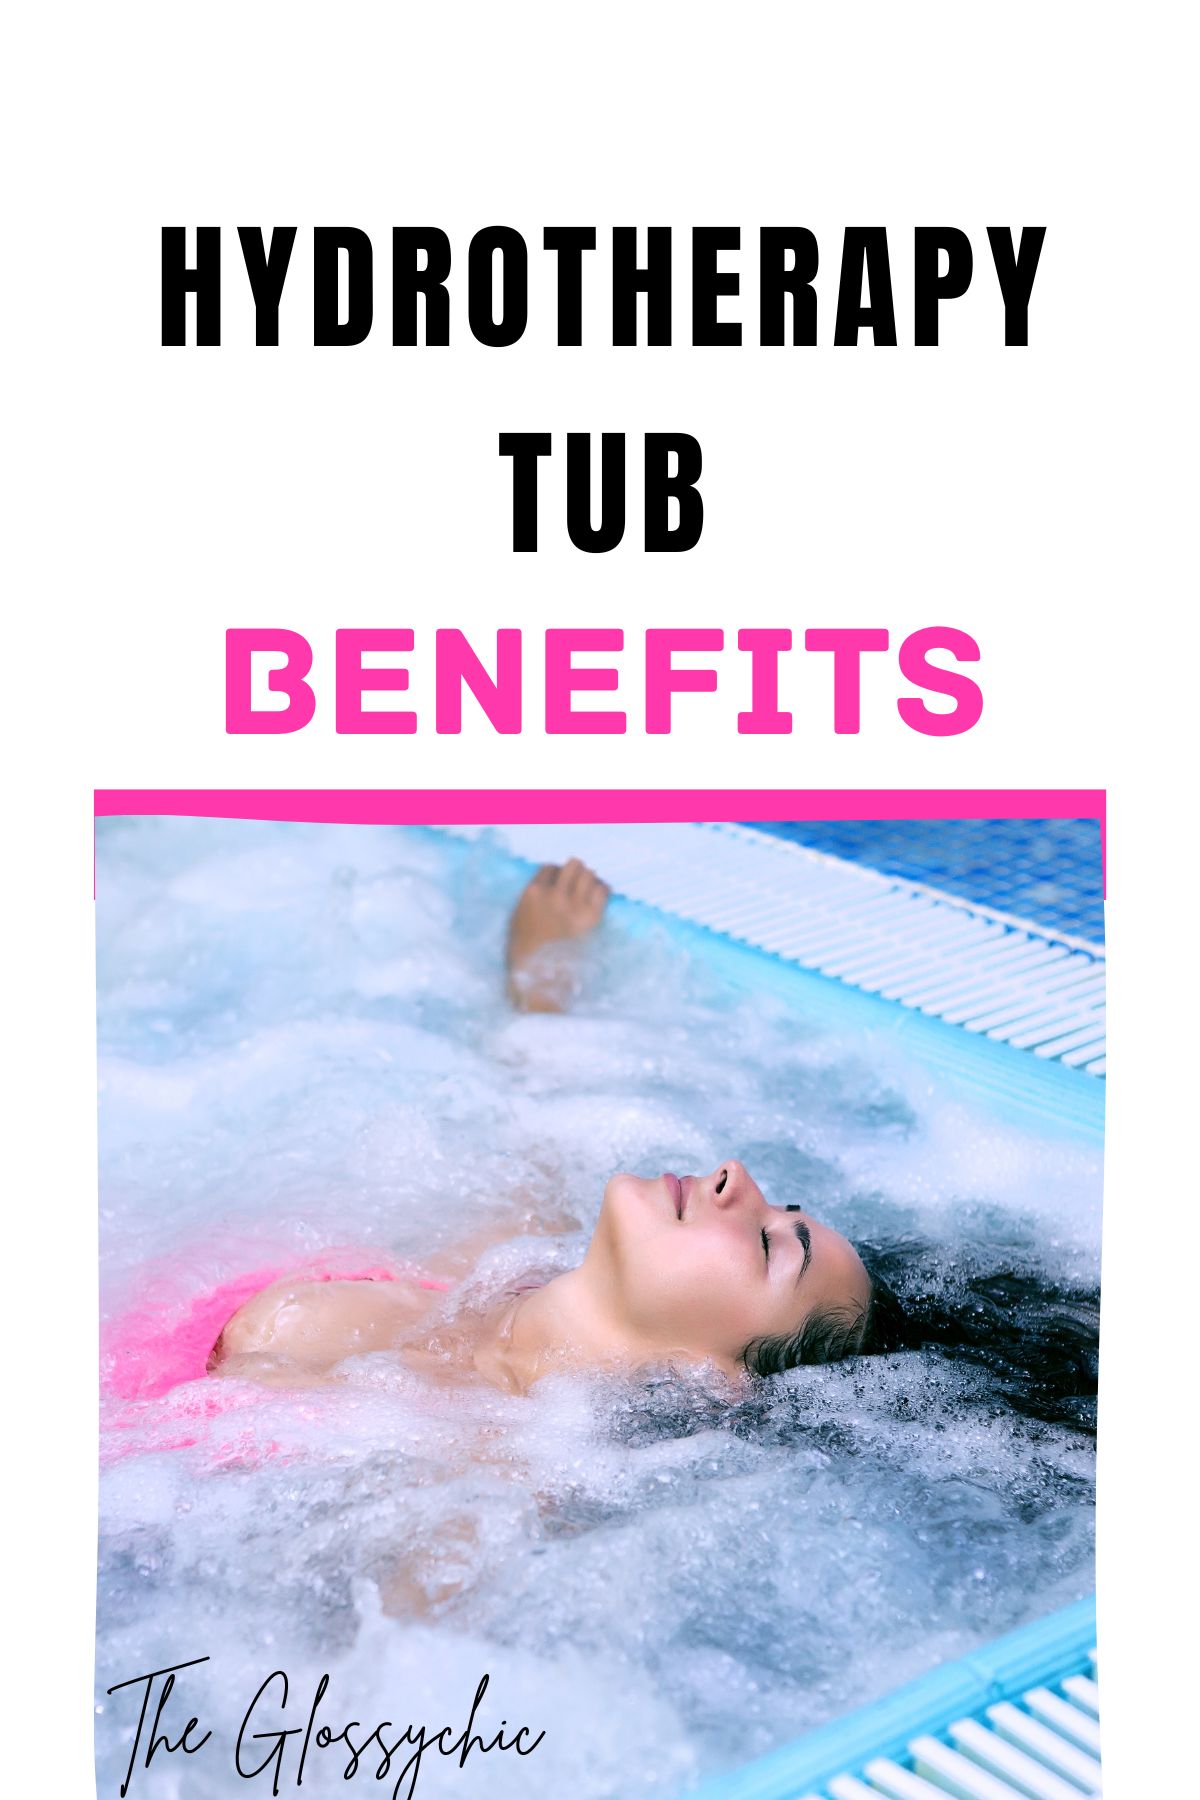 Significant benefits of hydrotherapy